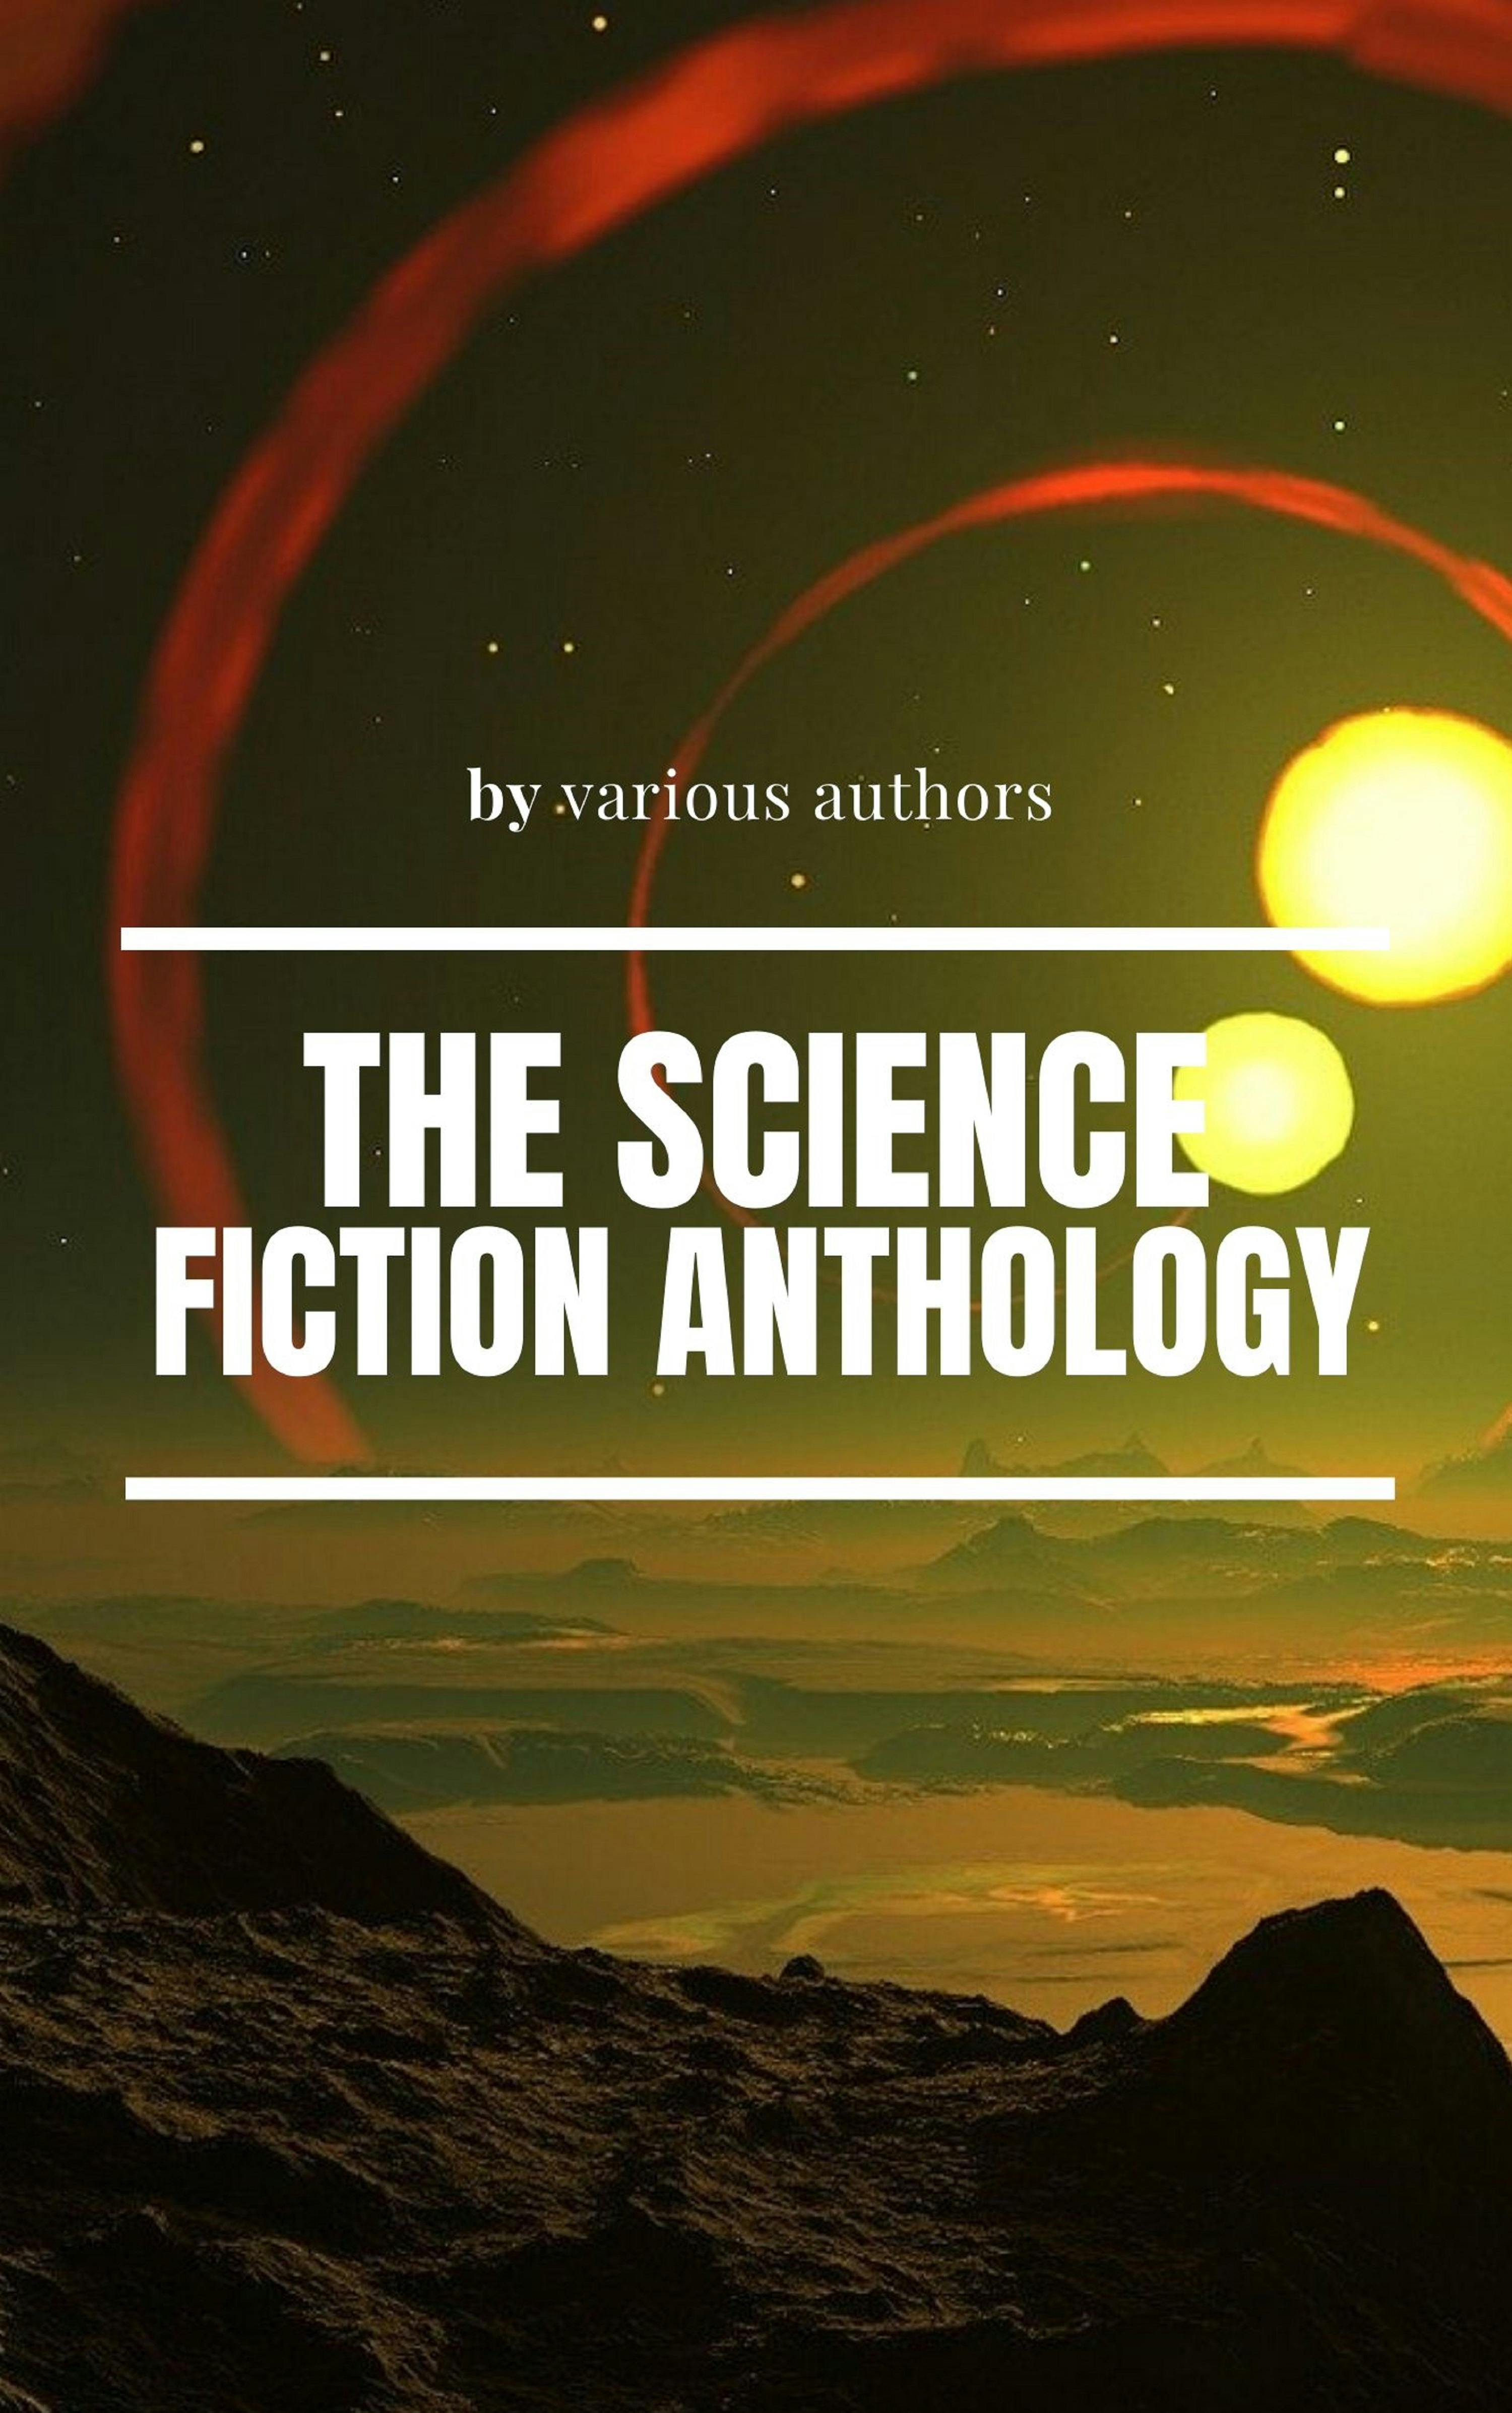 The Science Fiction anthology - undefined